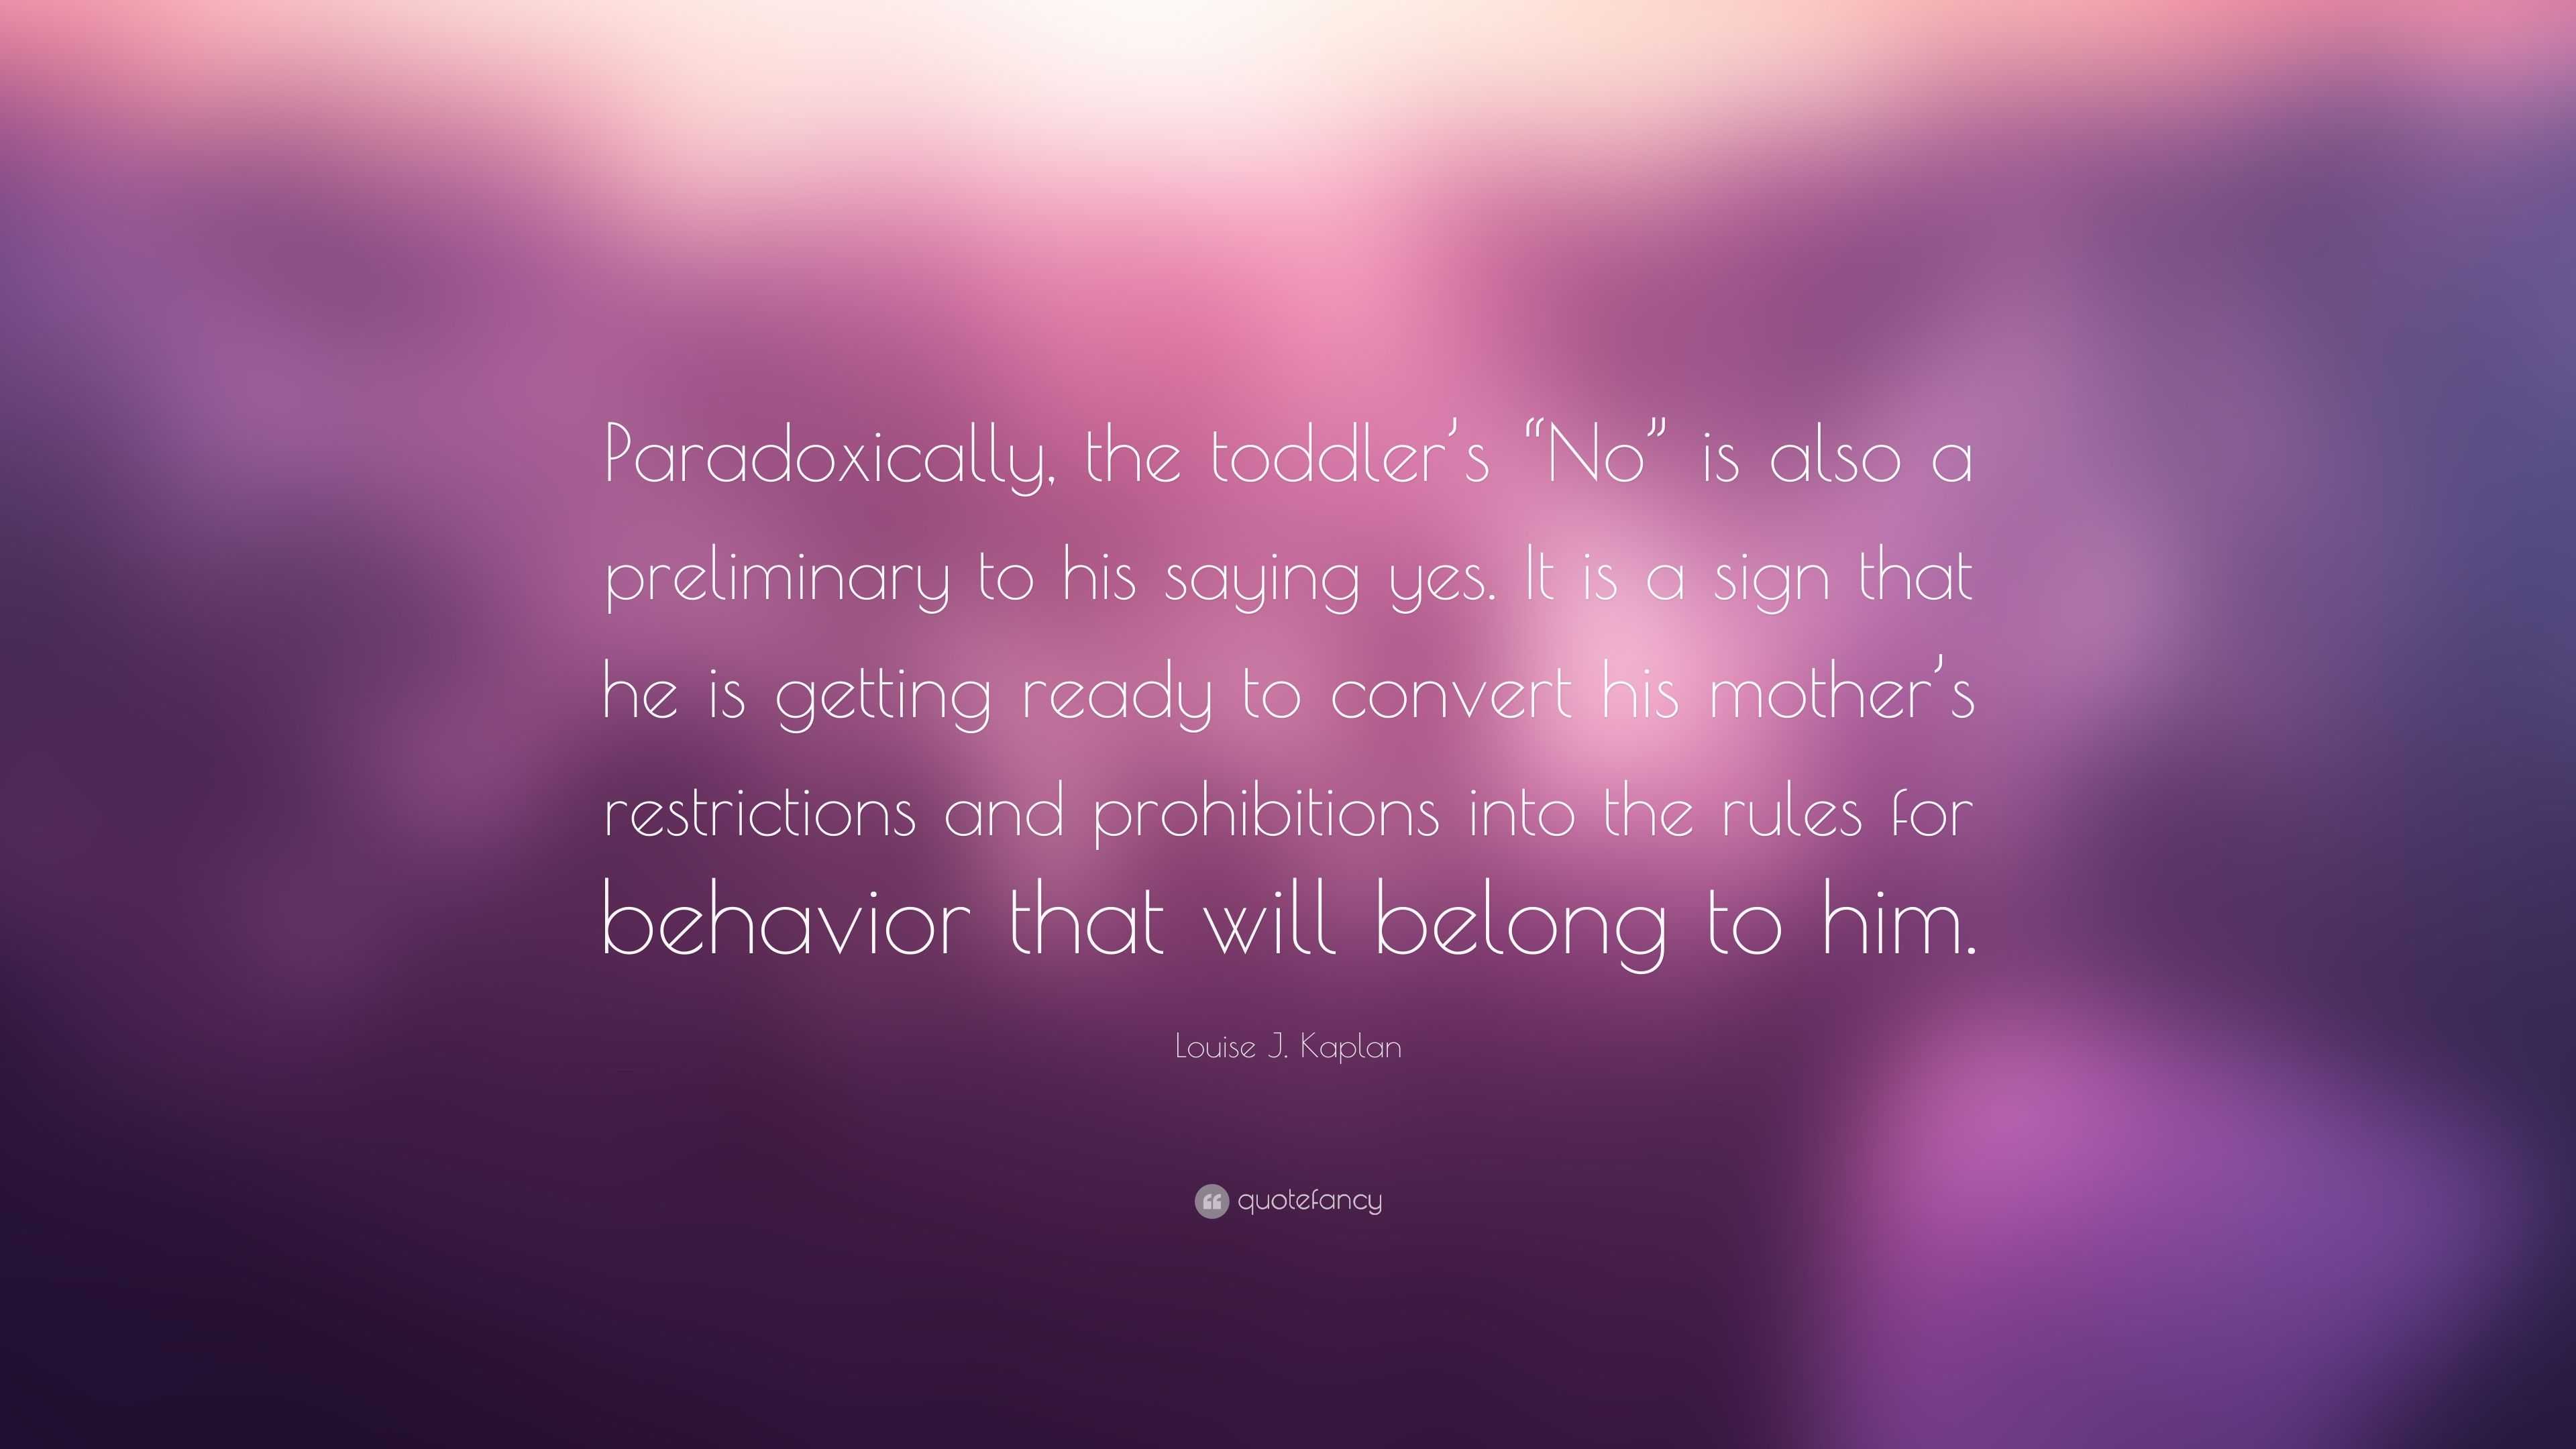 Louise J. Kaplan Quote: “Paradoxically, the toddler’s “No” is also a ...